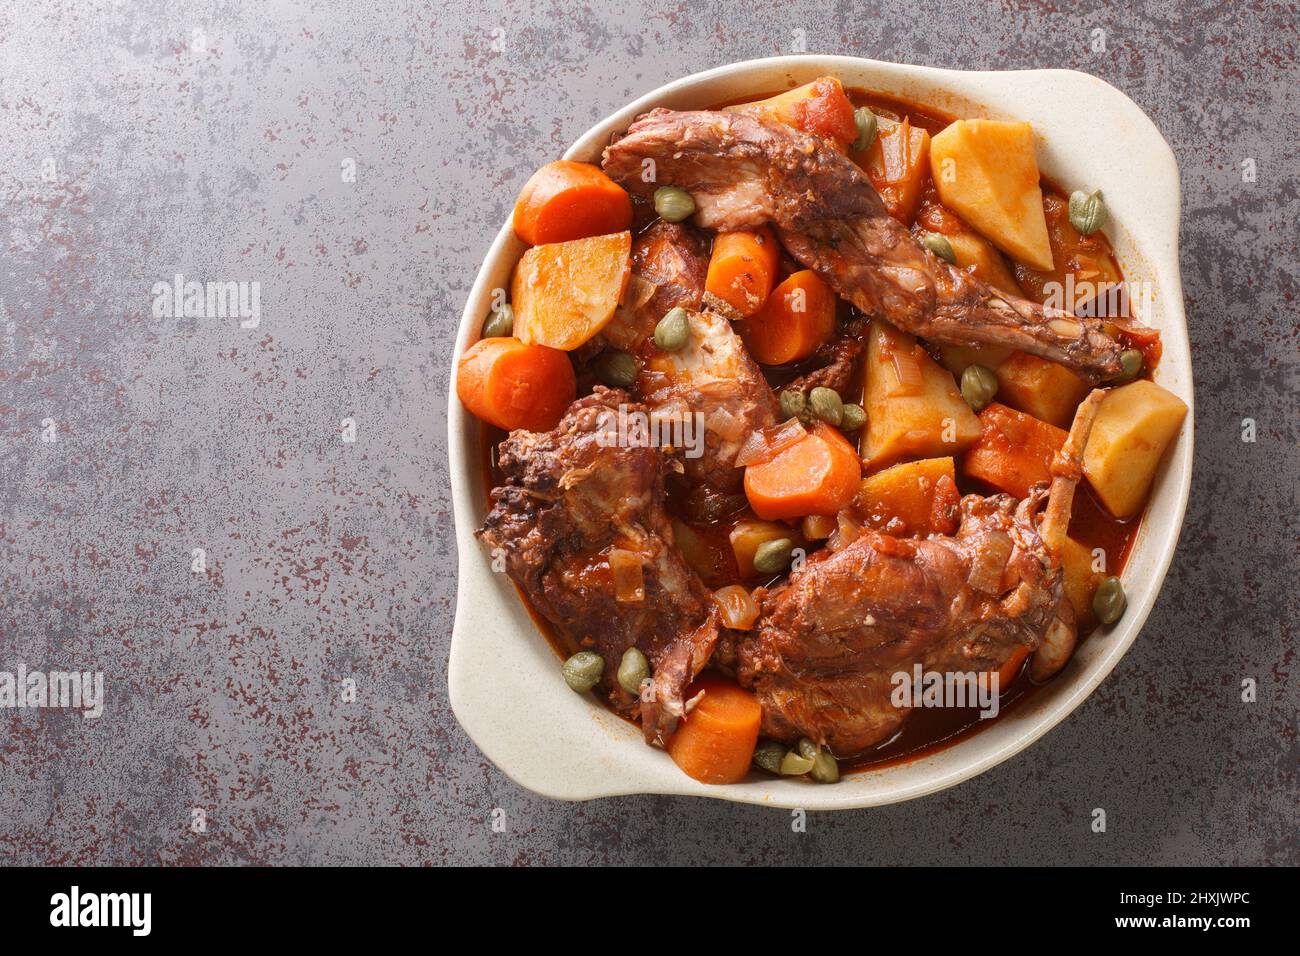 Fenkata dish of national Maltese cuisine cooked from rabbit meat with vegetables and gravy close-up in a saucepan on the table. horizontal top view fr Stock Photo